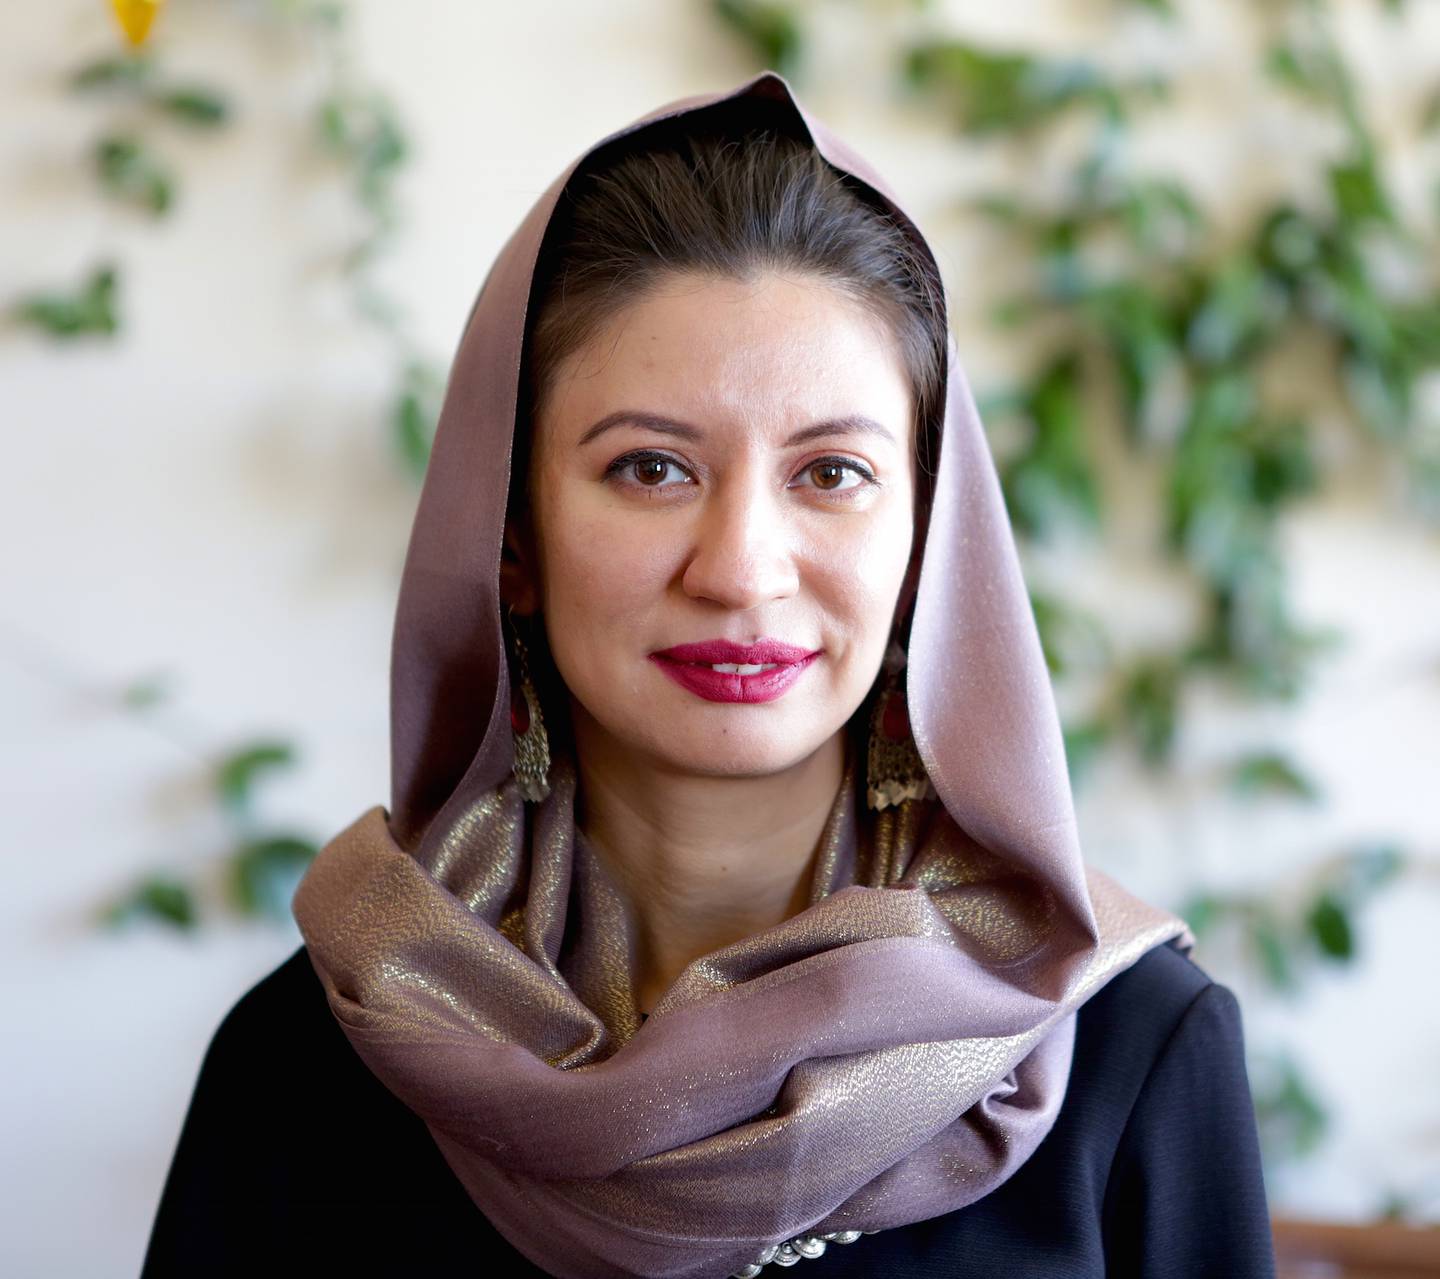 Shaharzad Akbar, the former chairperson of Afghanistan’s Independent Human Rights Commission. Photo: Shaharzad Akbar